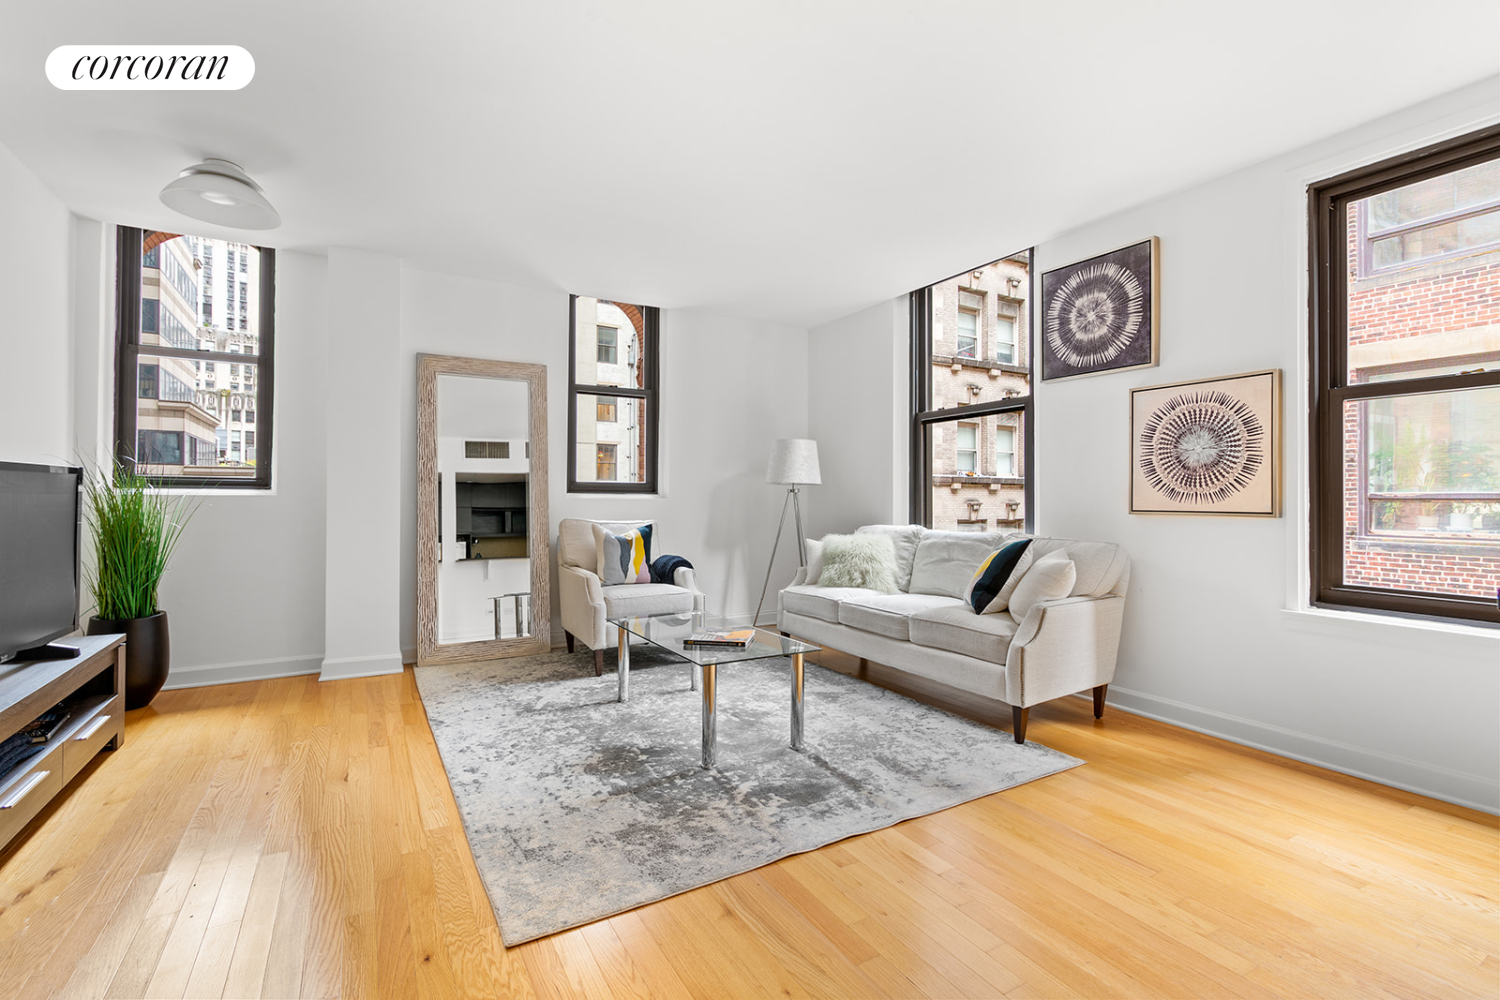 56 Pine Street 11A, Financial District, Downtown, NYC - 1 Bedrooms  
1 Bathrooms  
3 Rooms - 